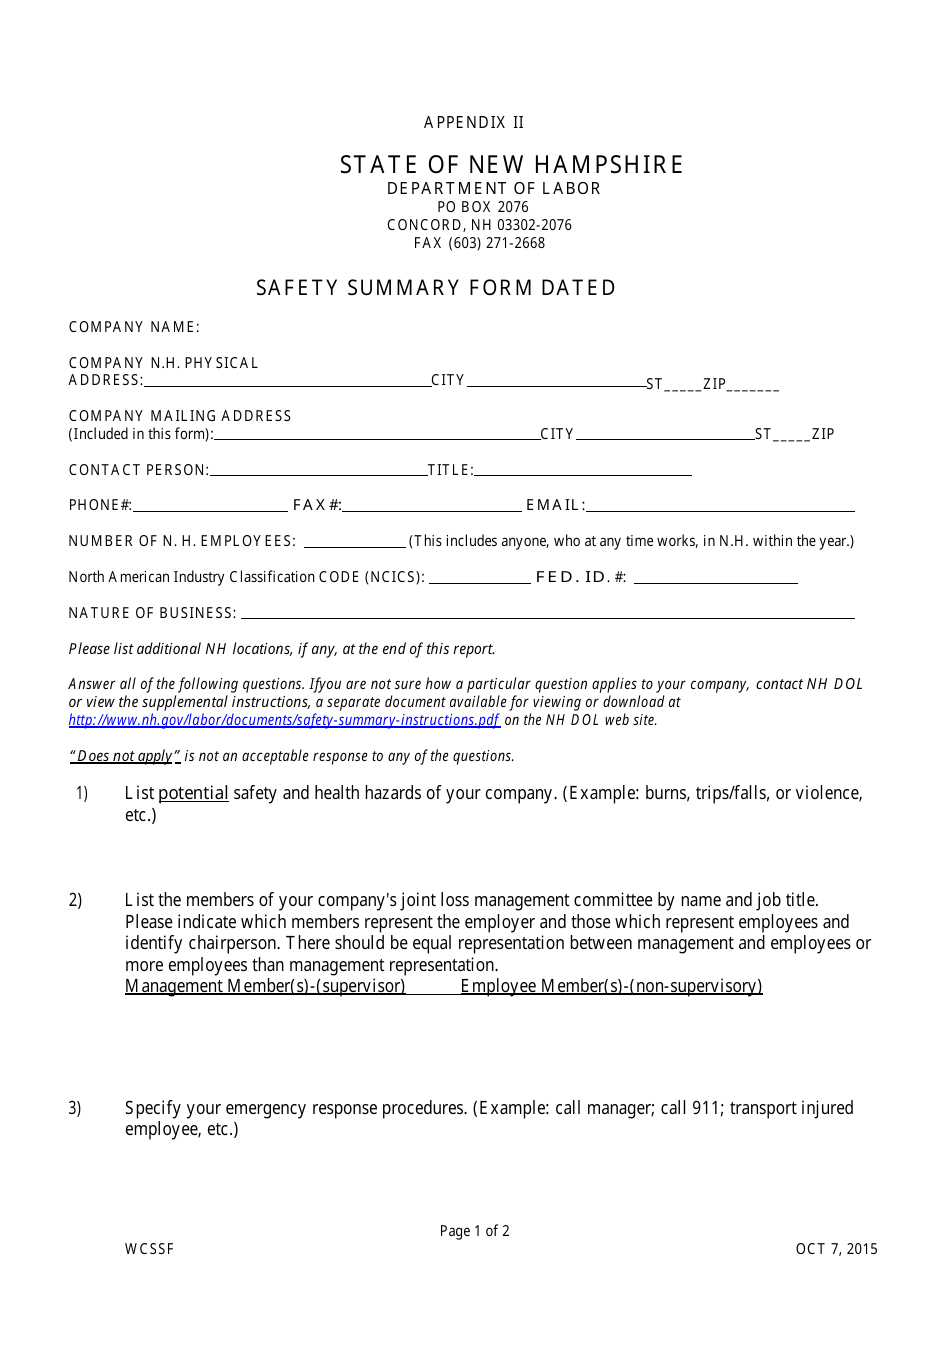 Appendix II Safety Summary Form - New Hampshire, Page 1